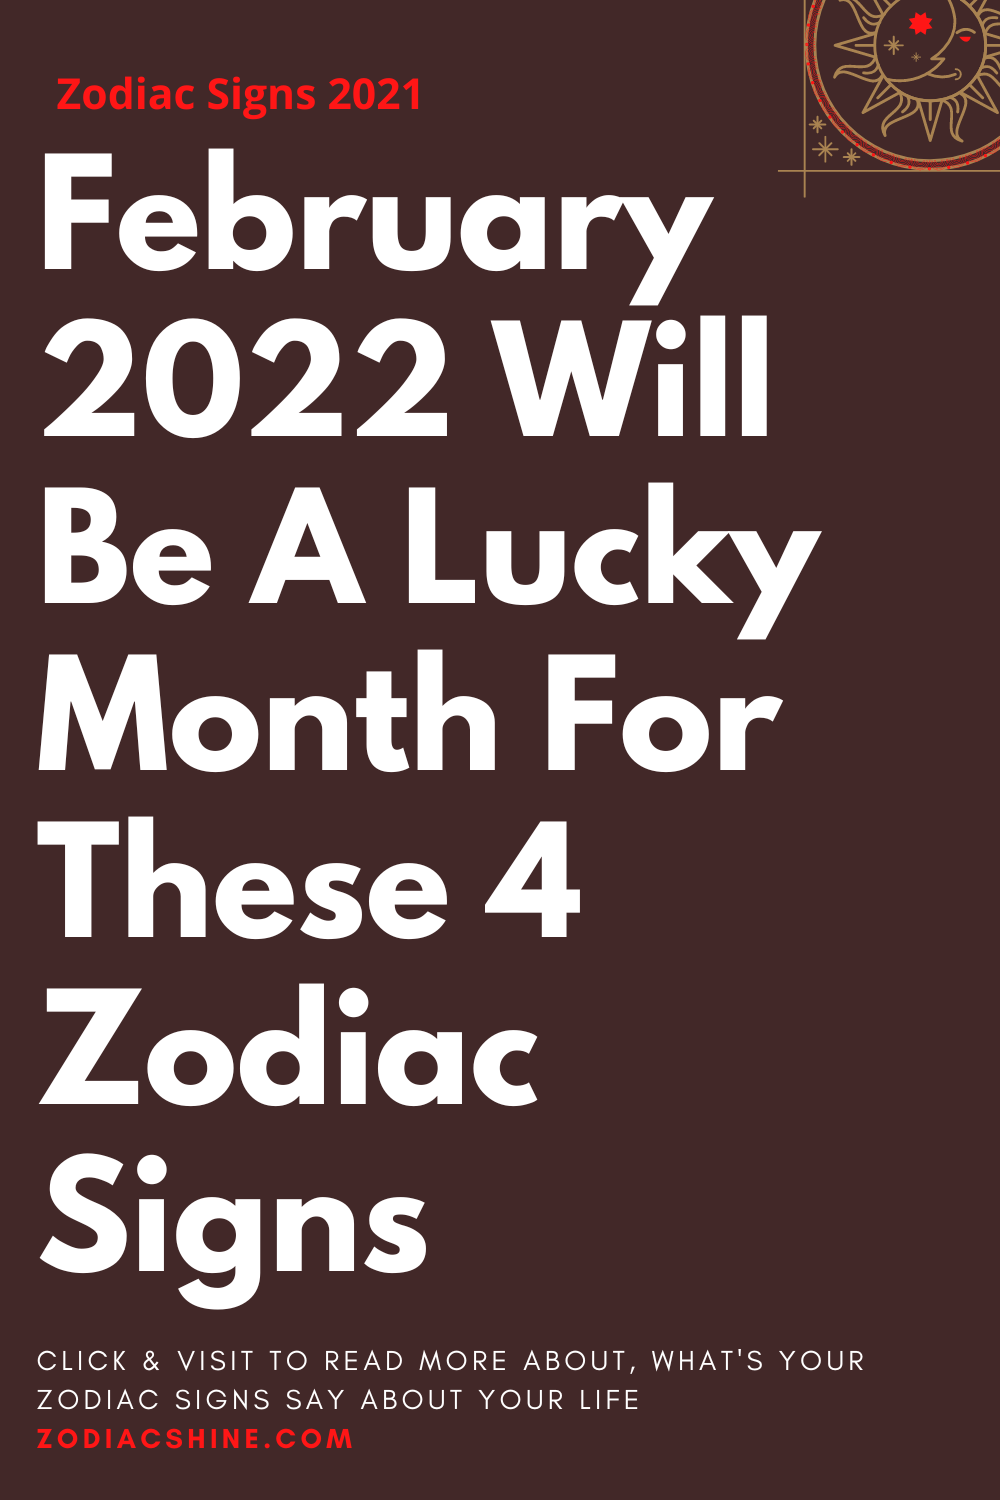 February 2022 Will Be A Lucky Month For These 4 Zodiac Signs